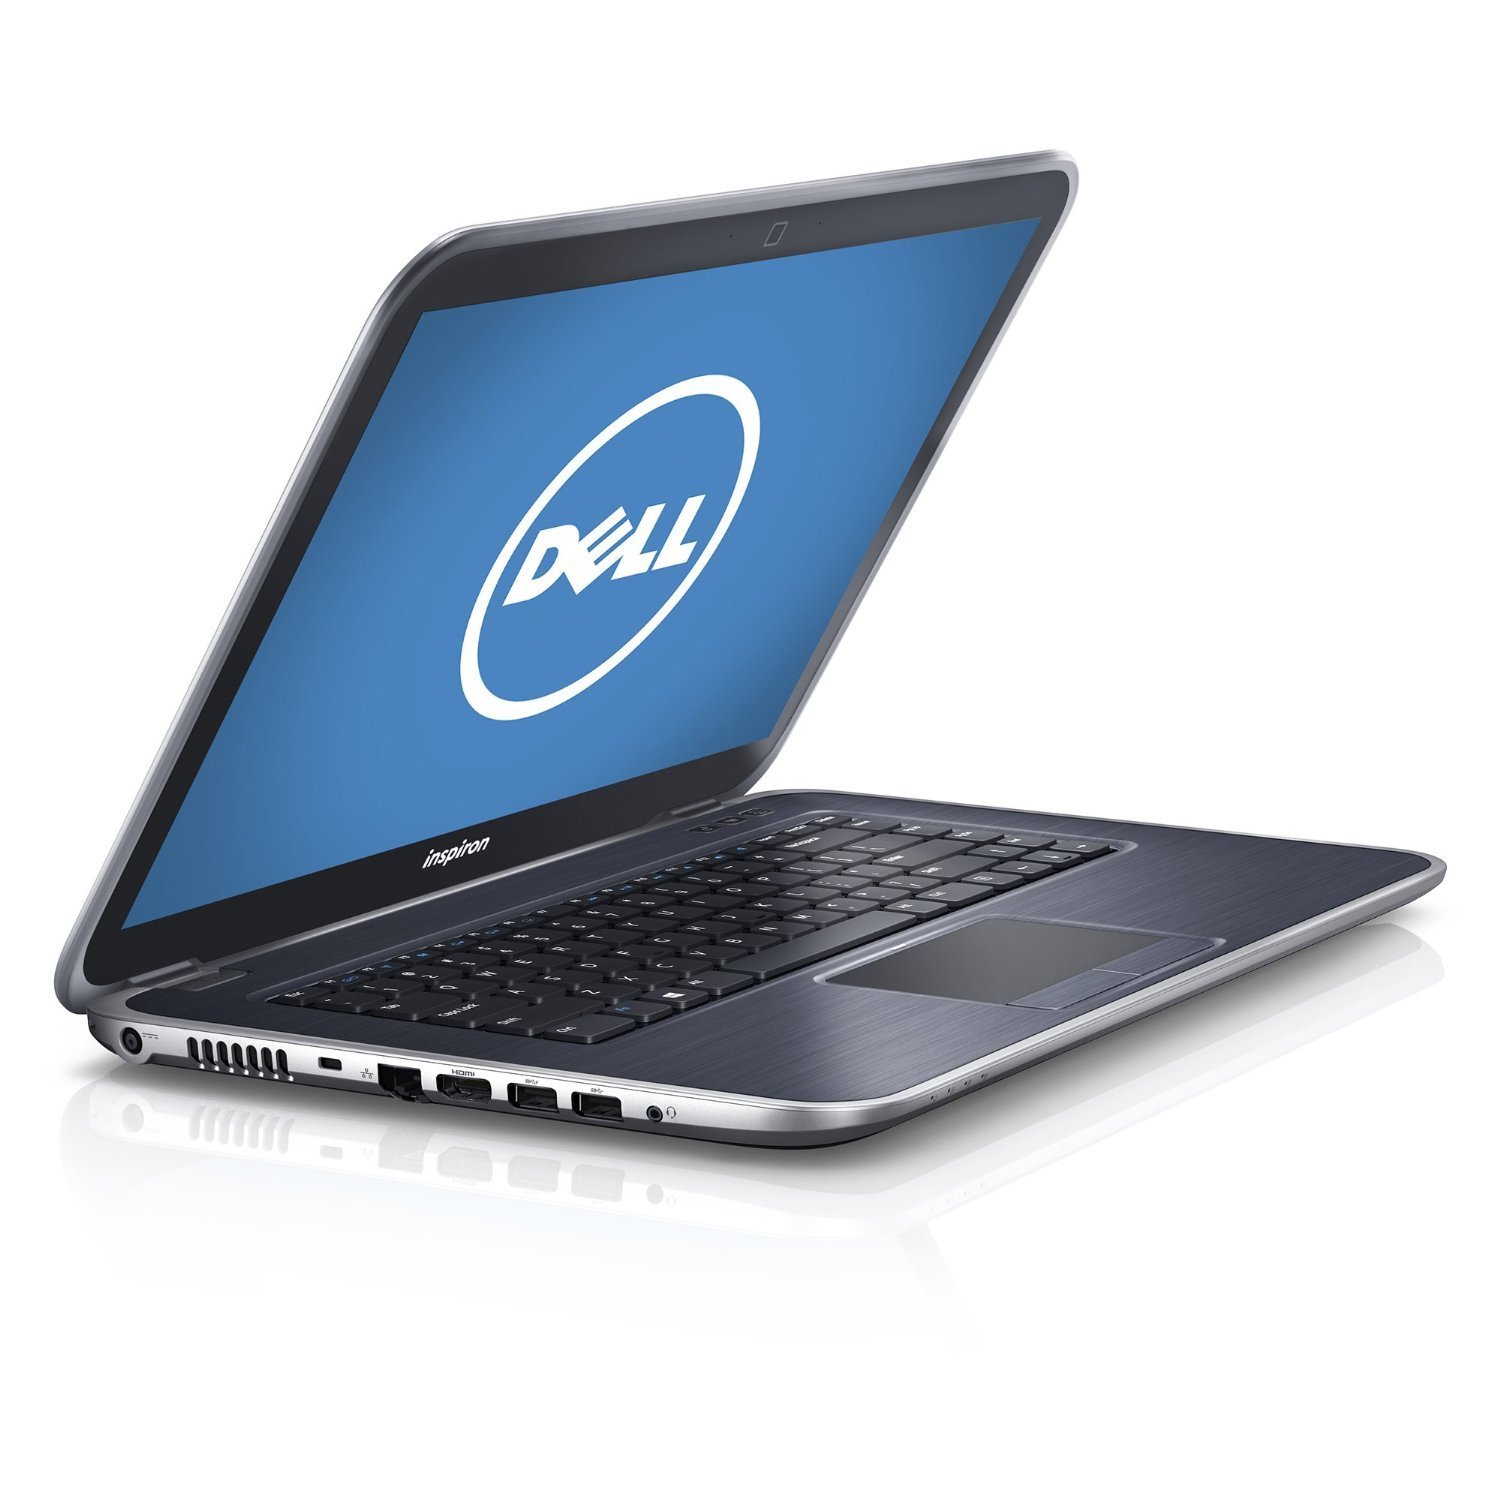 Ugg Boots Review Dell Inspiron 15 Laptop  Santa Barbara Institute for 